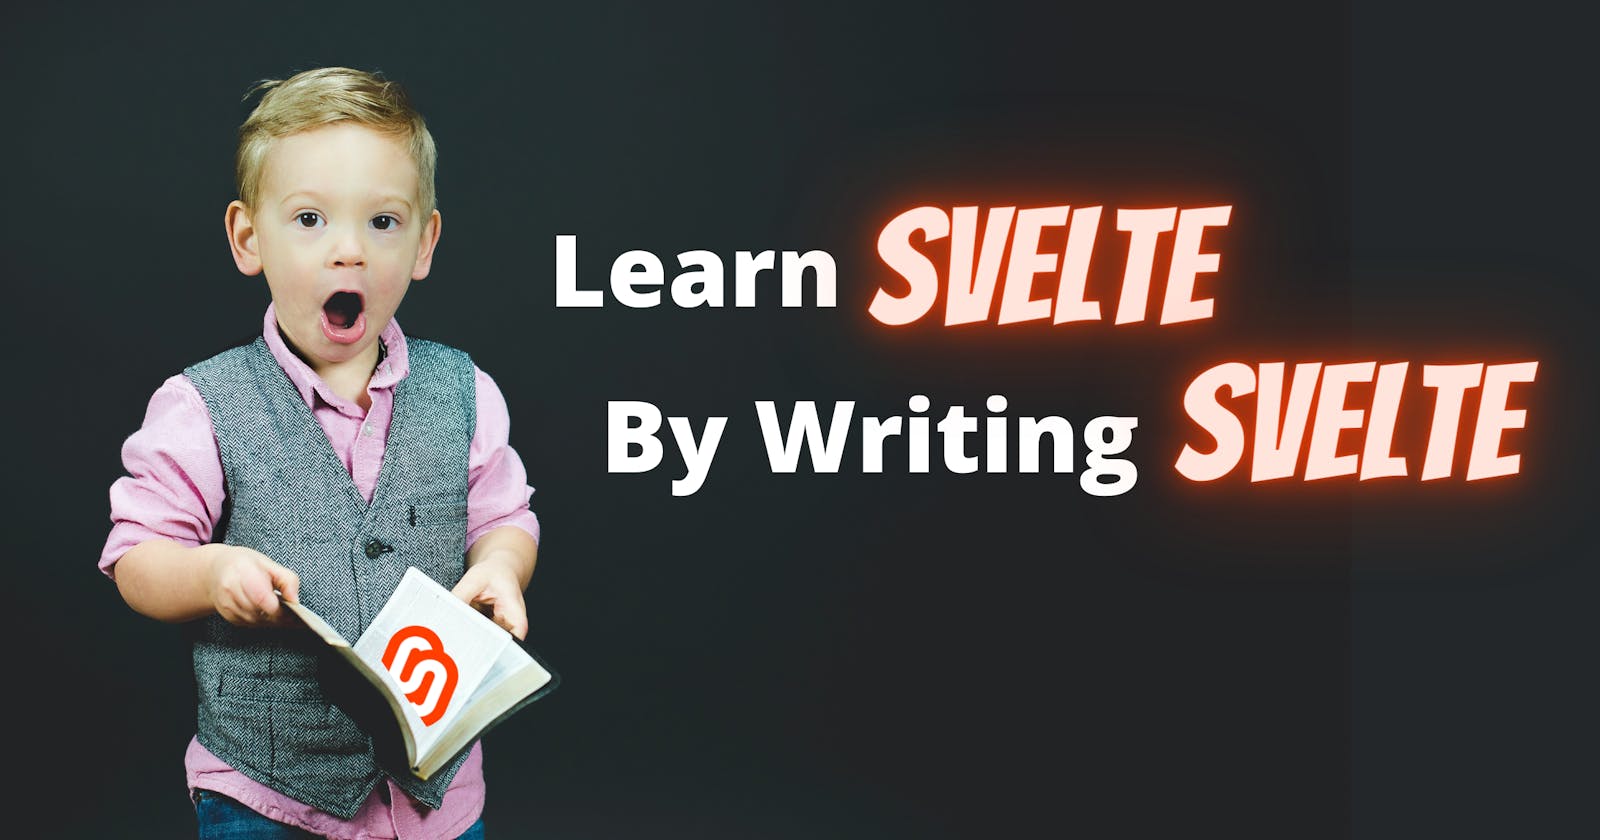 Learn Svelte by Writing Svelte – Using Side Projects To Learn a New Tech